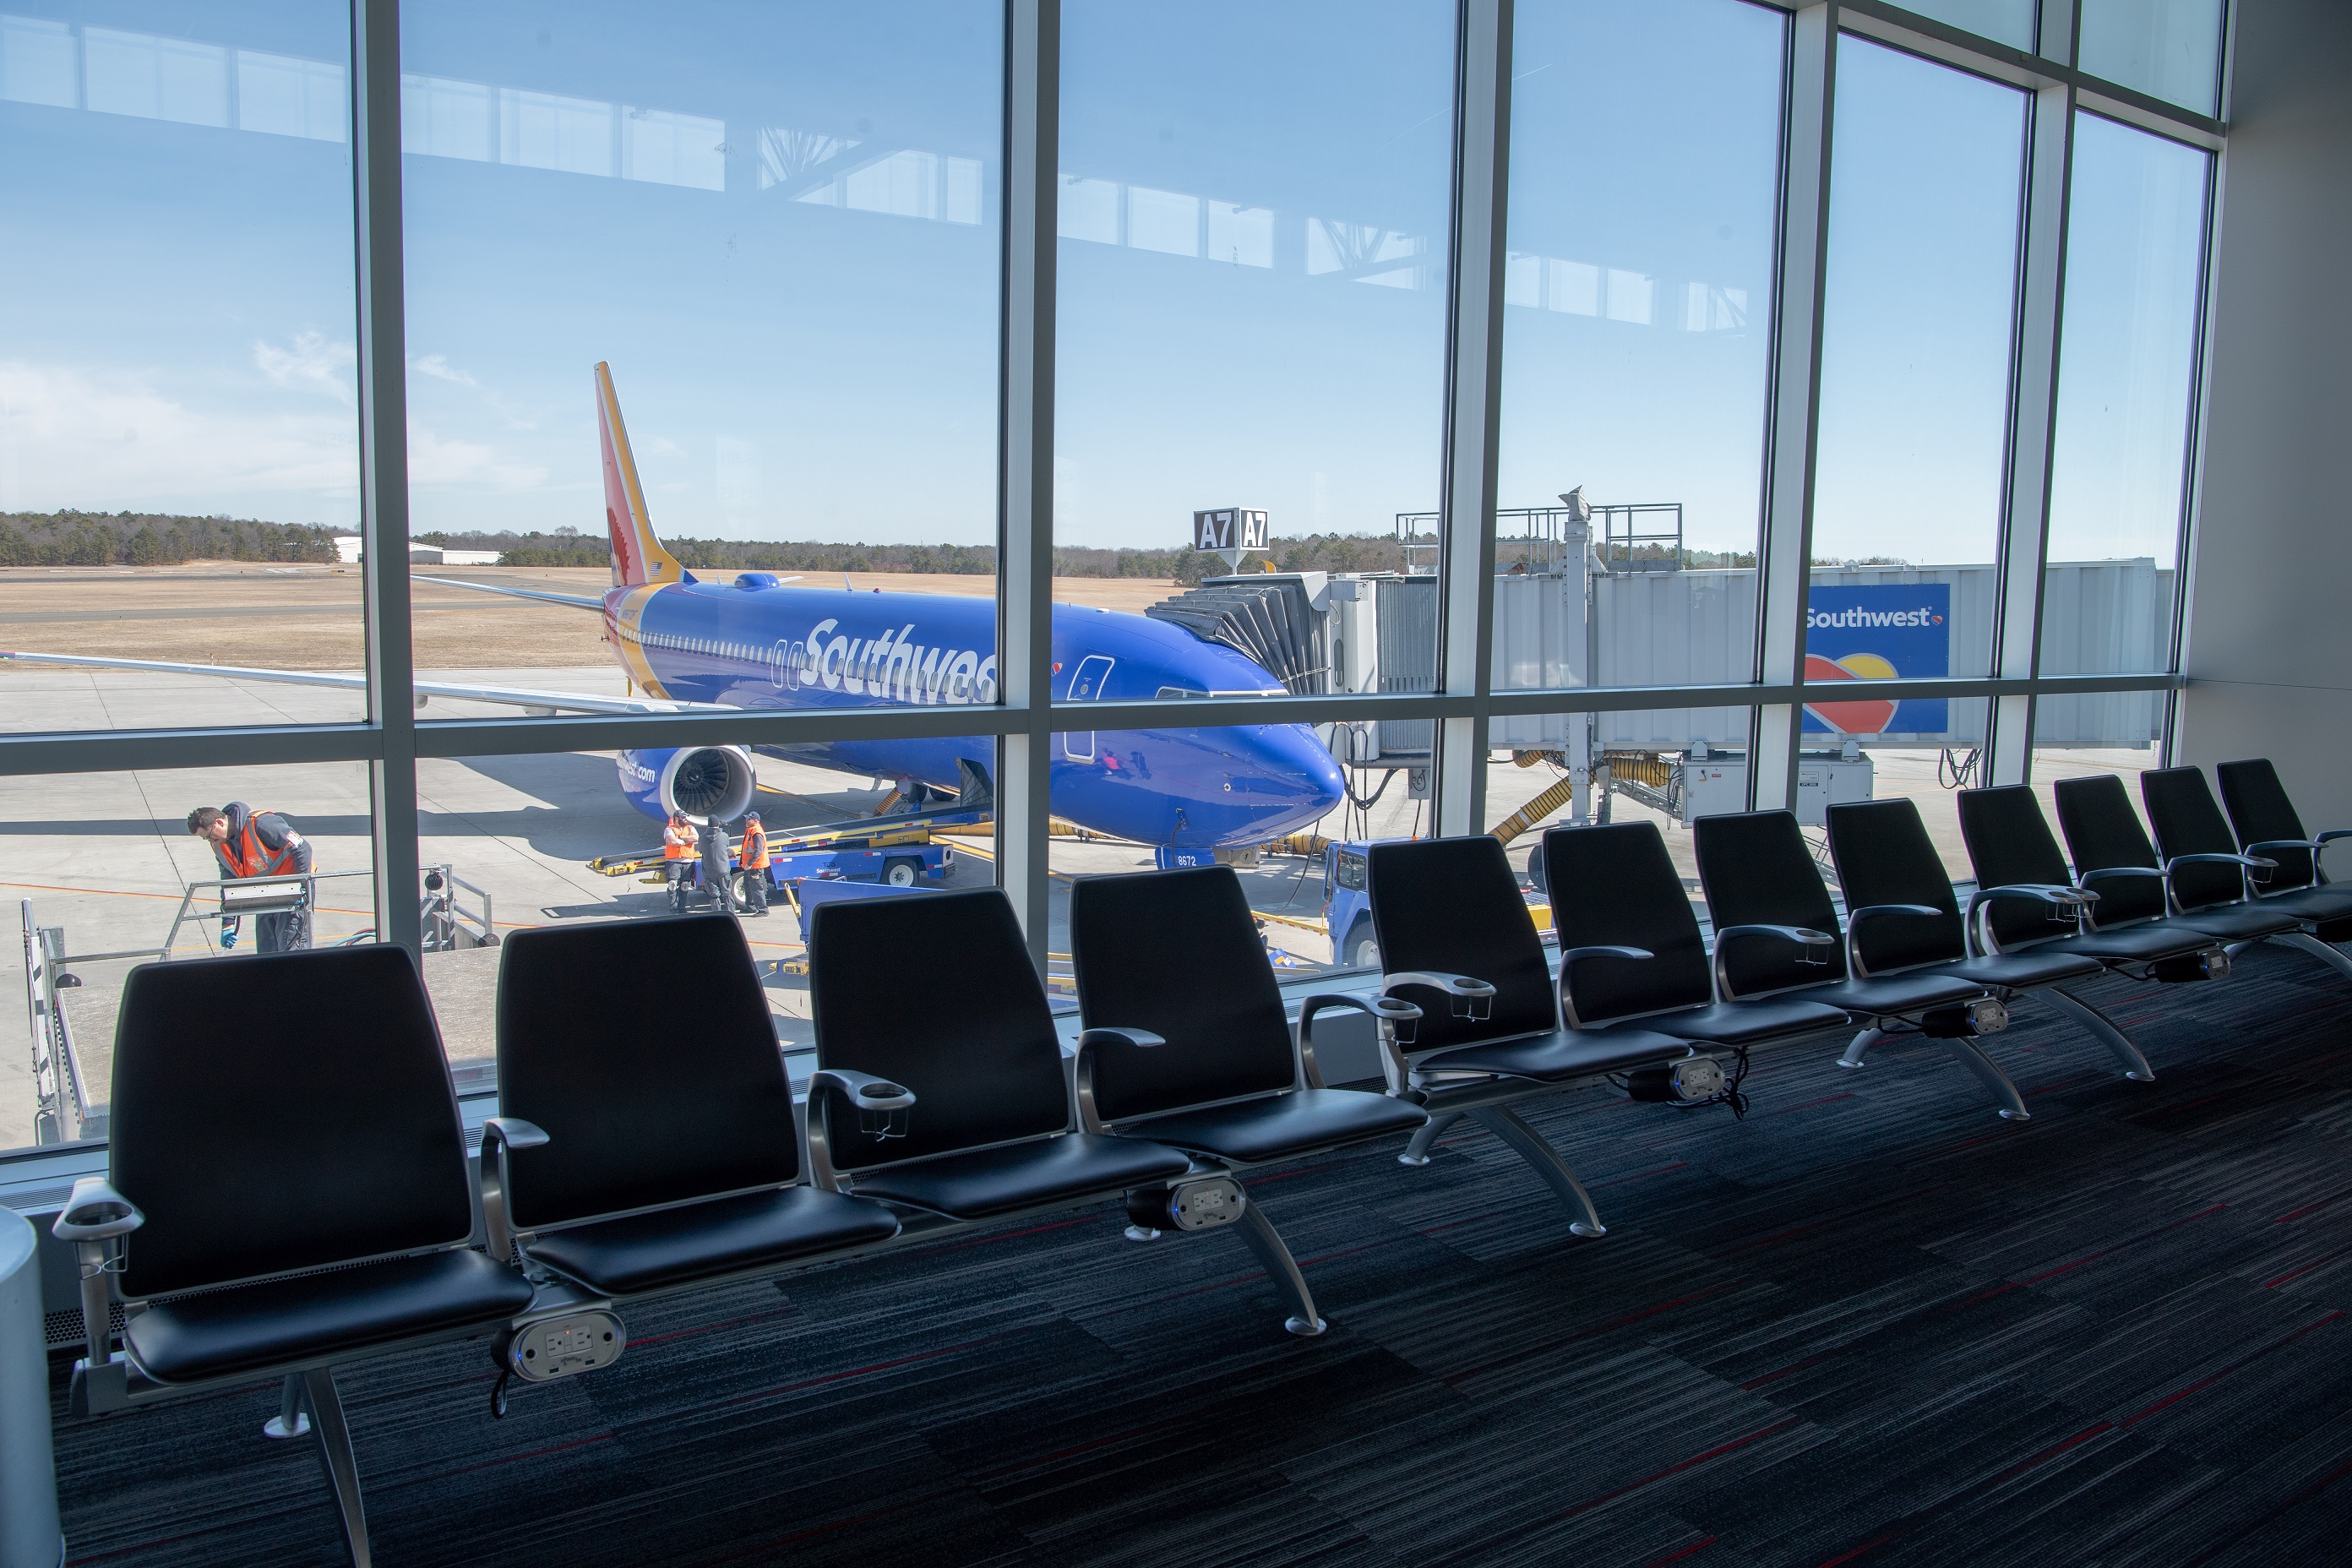  An image of a row of seats in front of terminal glass, a southwest airplane at the terminal on the other side.